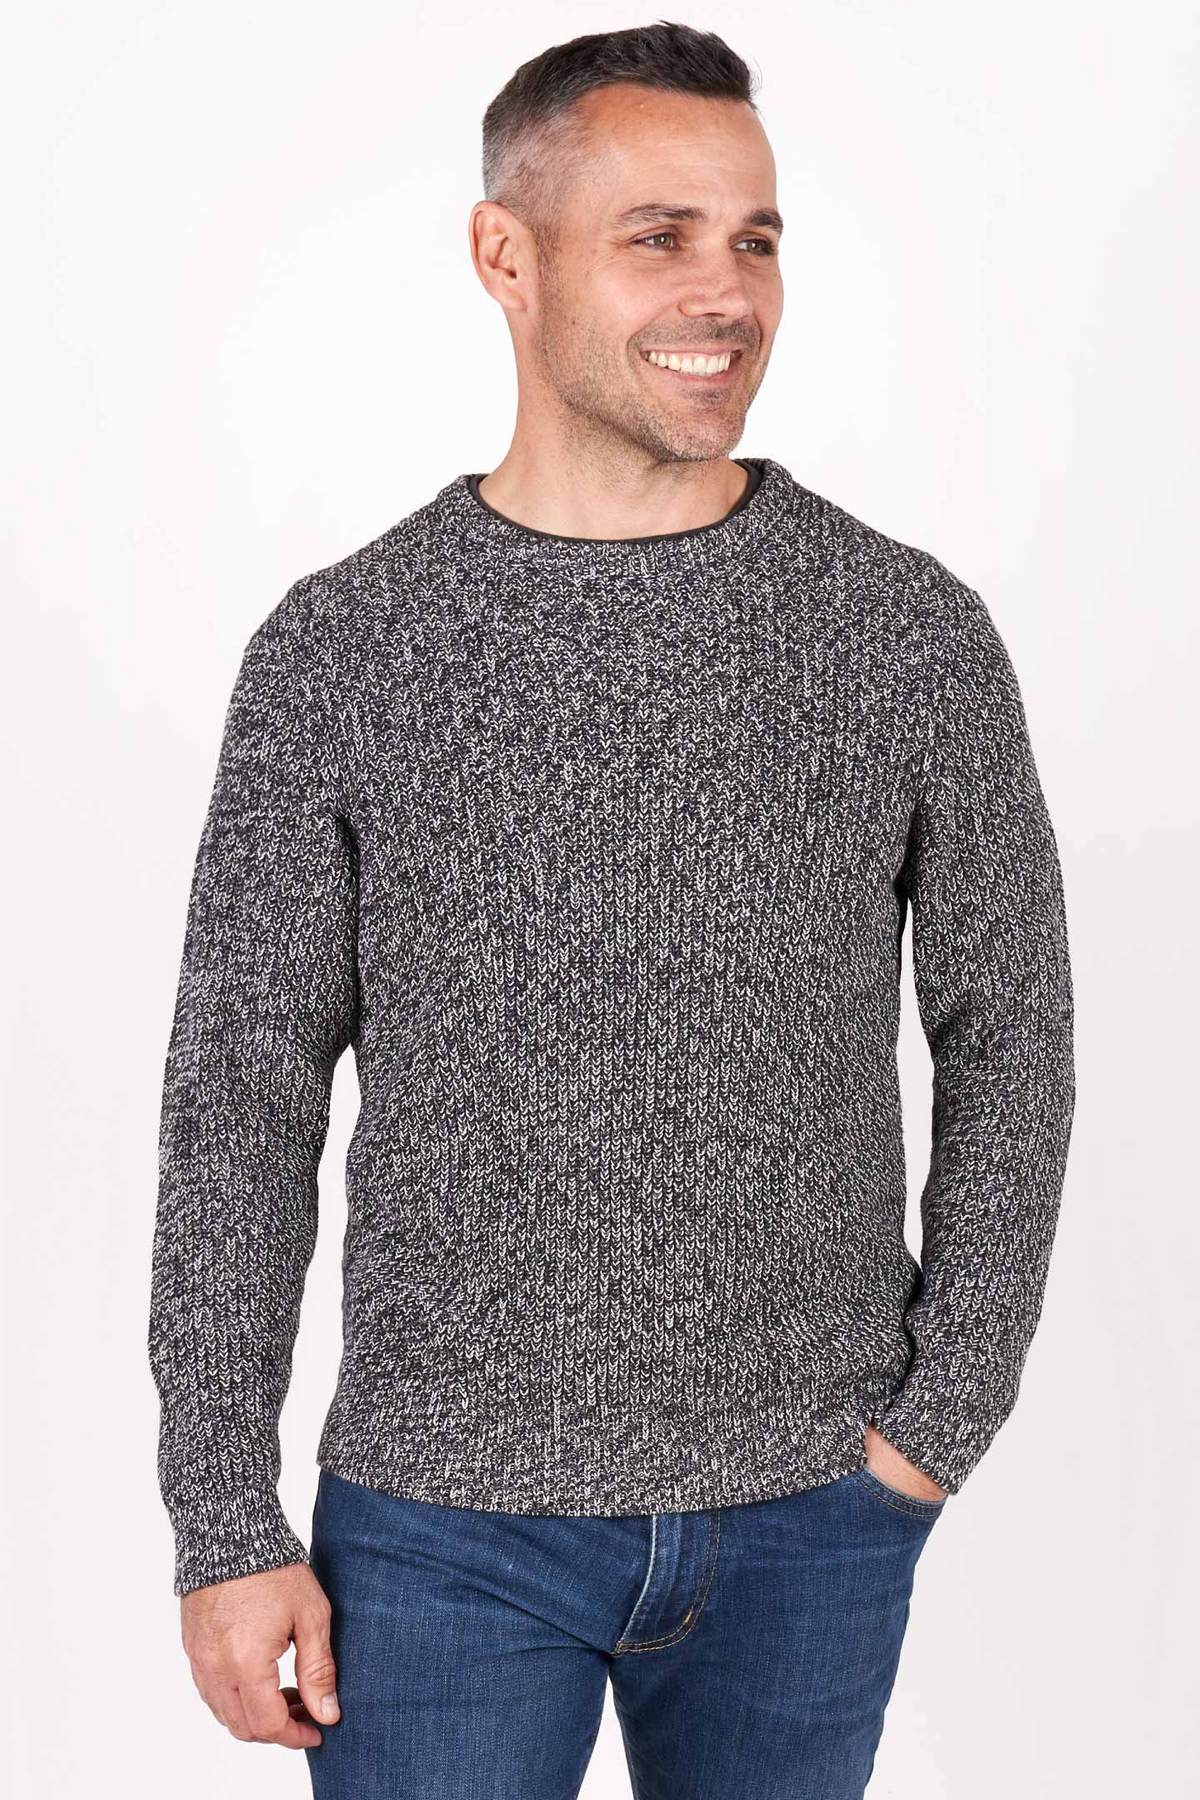 Ash and Erie fog grey knit sweater